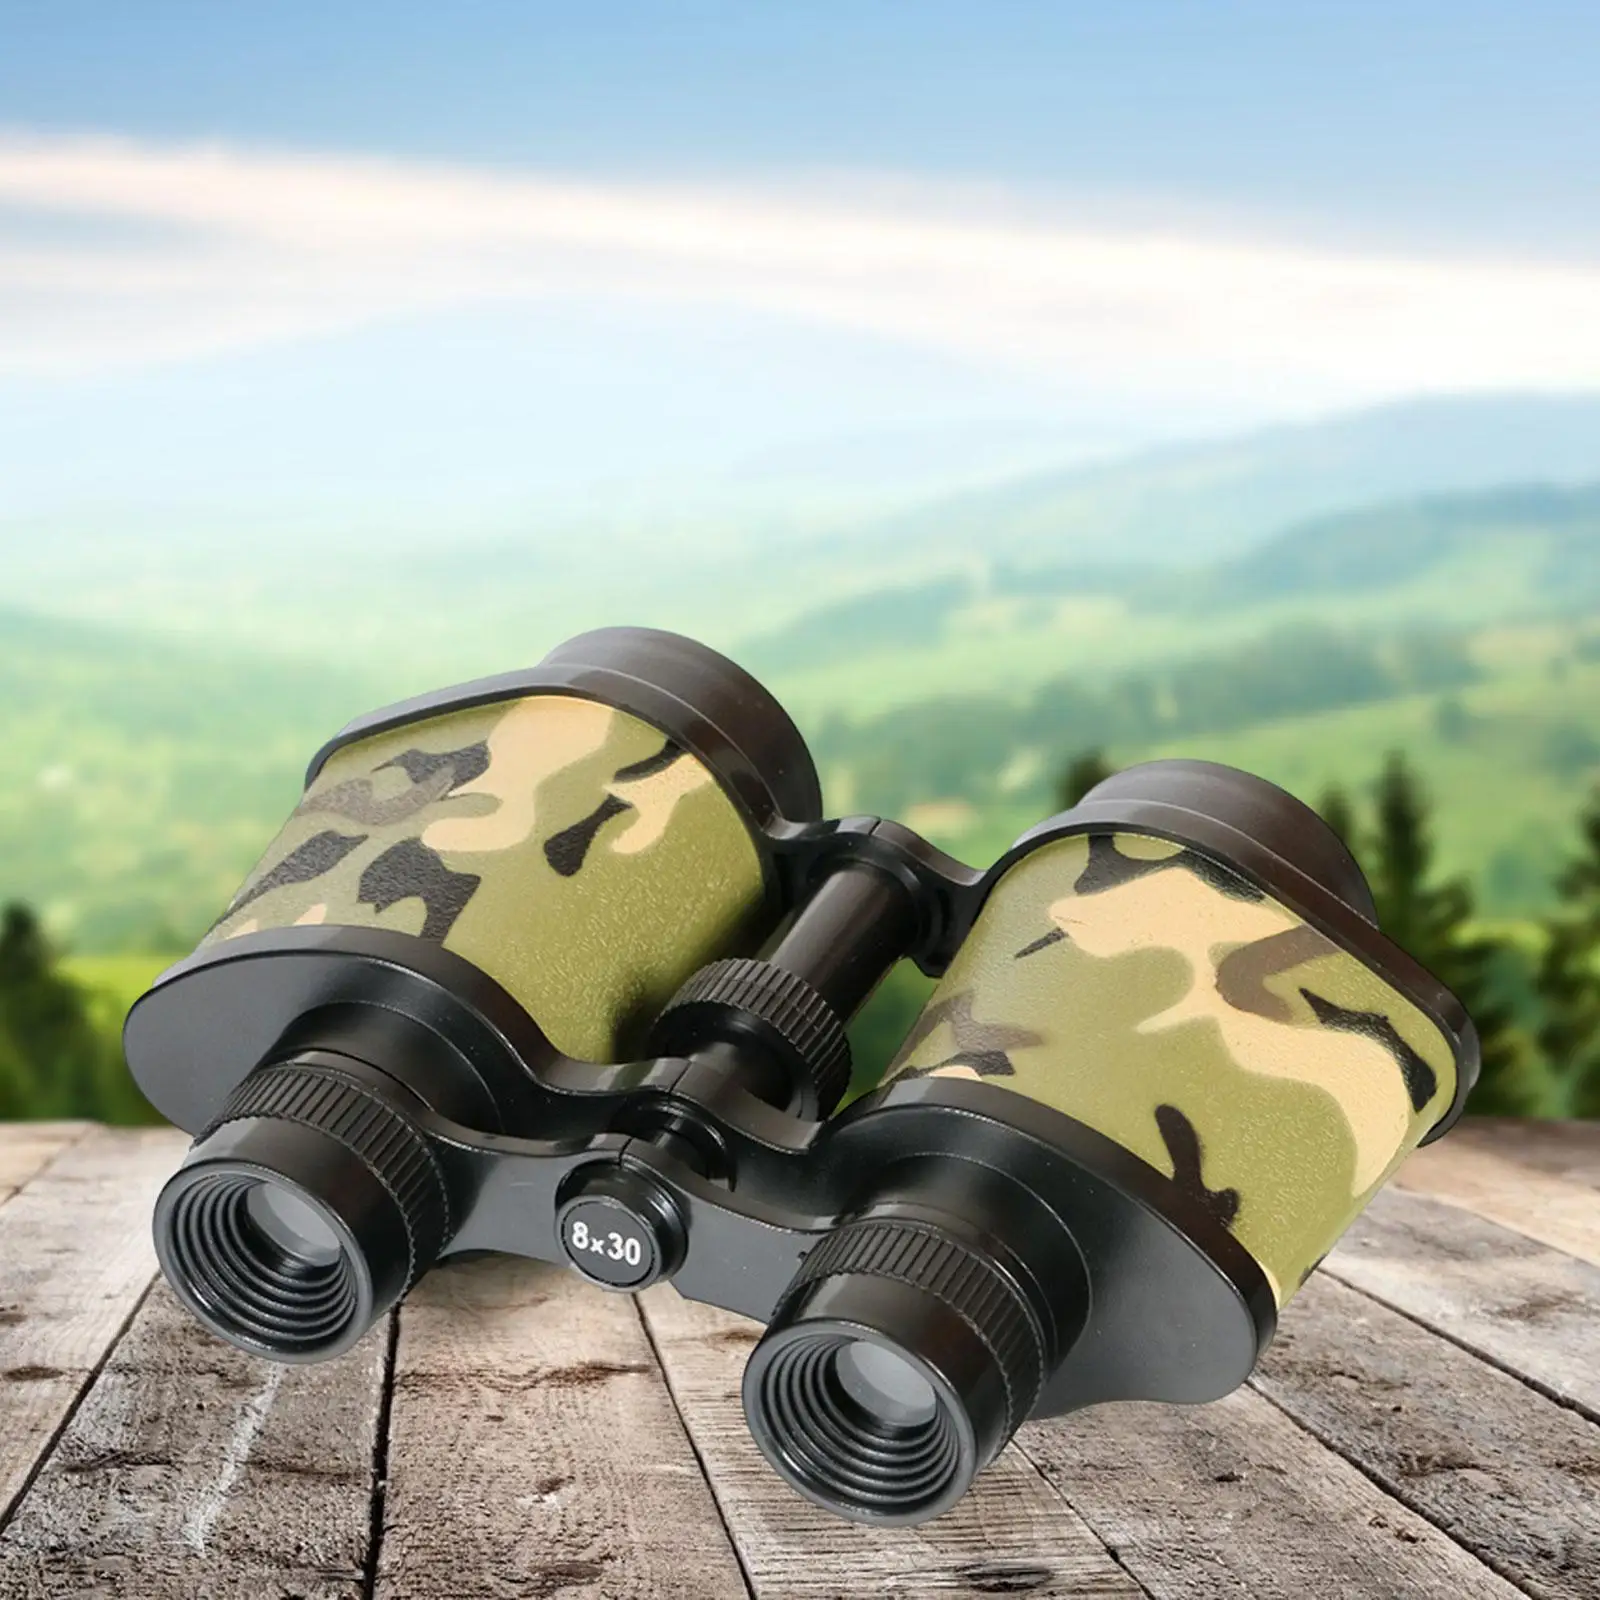 Kids Binoculars Toy 8x30 Learning High Resolution Lightweight Jungle Binoculars Toy for Birthday Science Sports Camping Presents